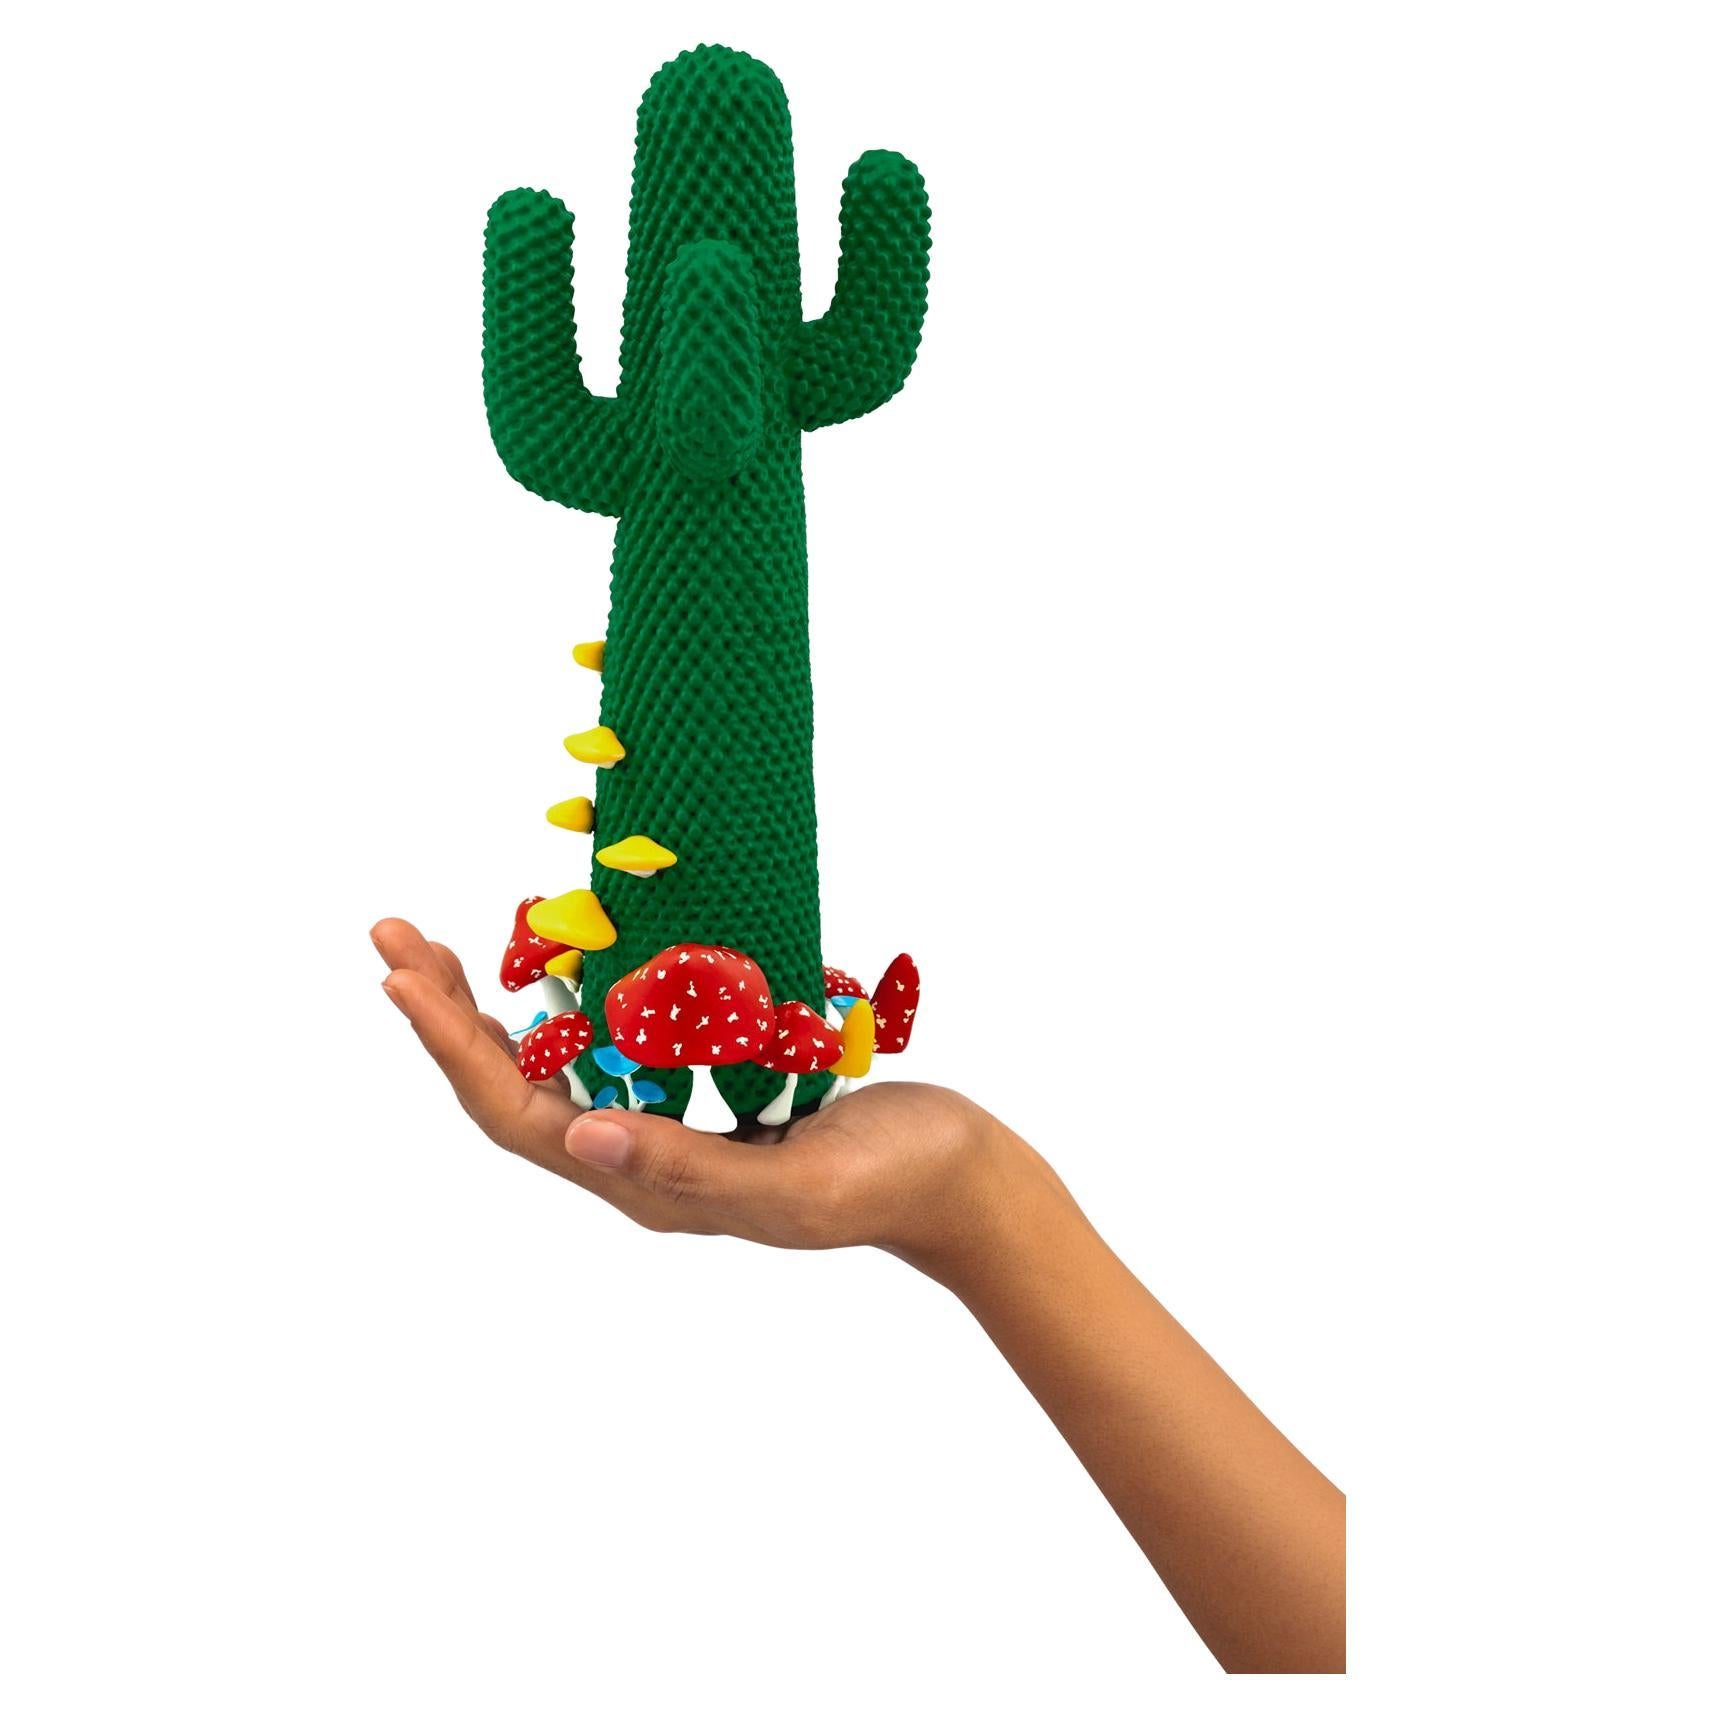 Limites edition #85/99

Gufram presents the miniaturised version of the Shroom CACTUS® created in collaboration with A$AP Rocky and the artist’s new design studio HOMMEMADE Exactly as the real-size Shroom CACTUS®, the new Guframini piece features